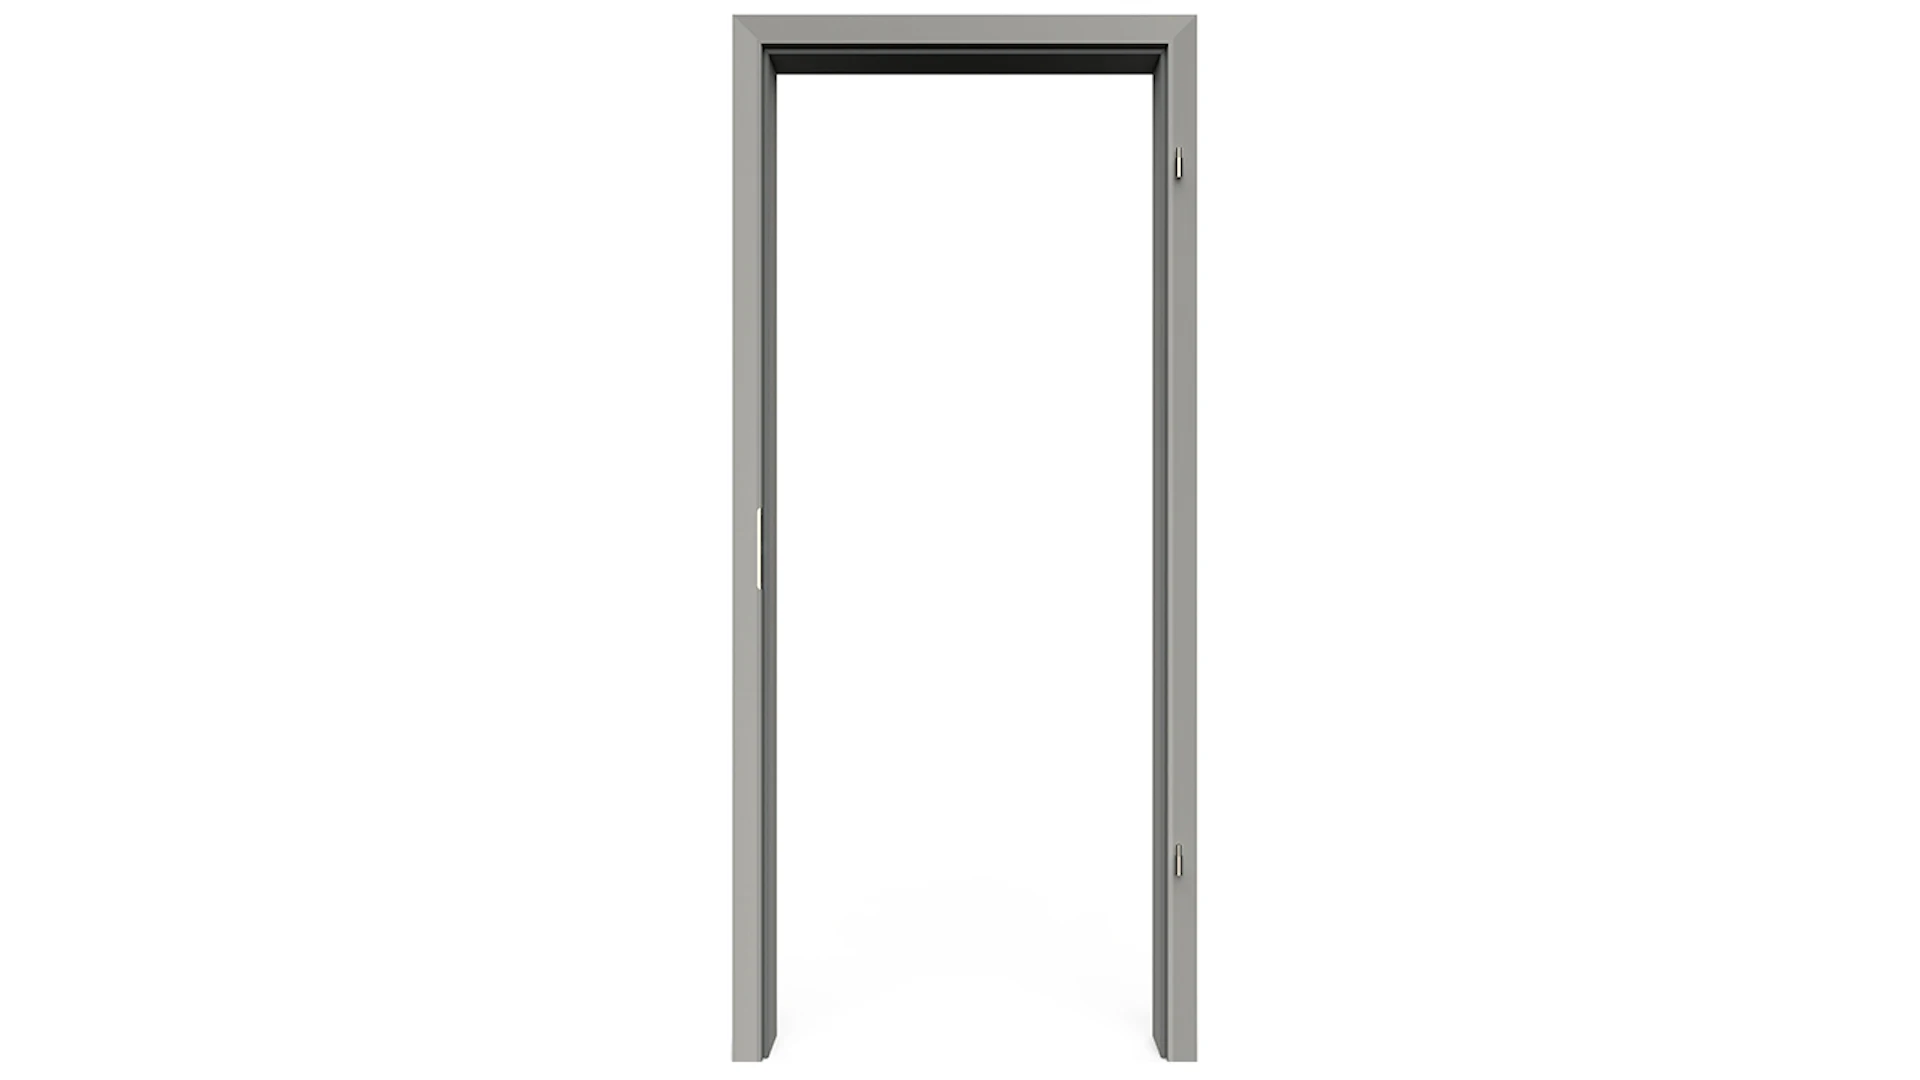 planeo Standard Door frame, rounded edge - CPL Silver grey - 2110 x 610 x 220 mm DIN Right